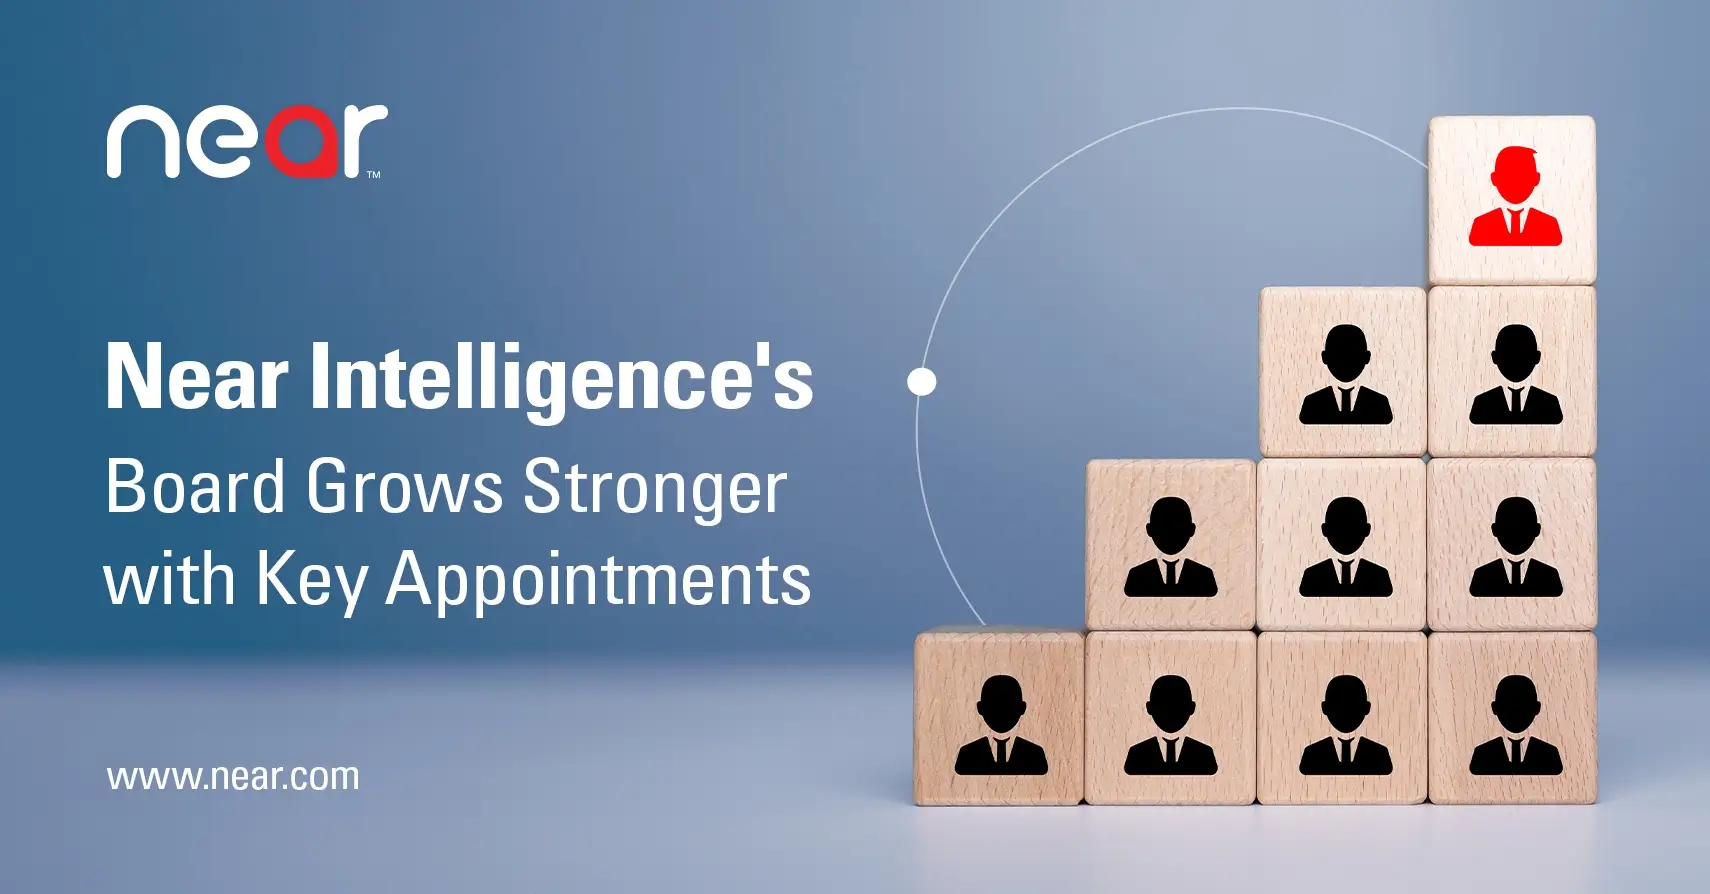 Near Intelligence’s Board Grows Stronger with Key Appointments